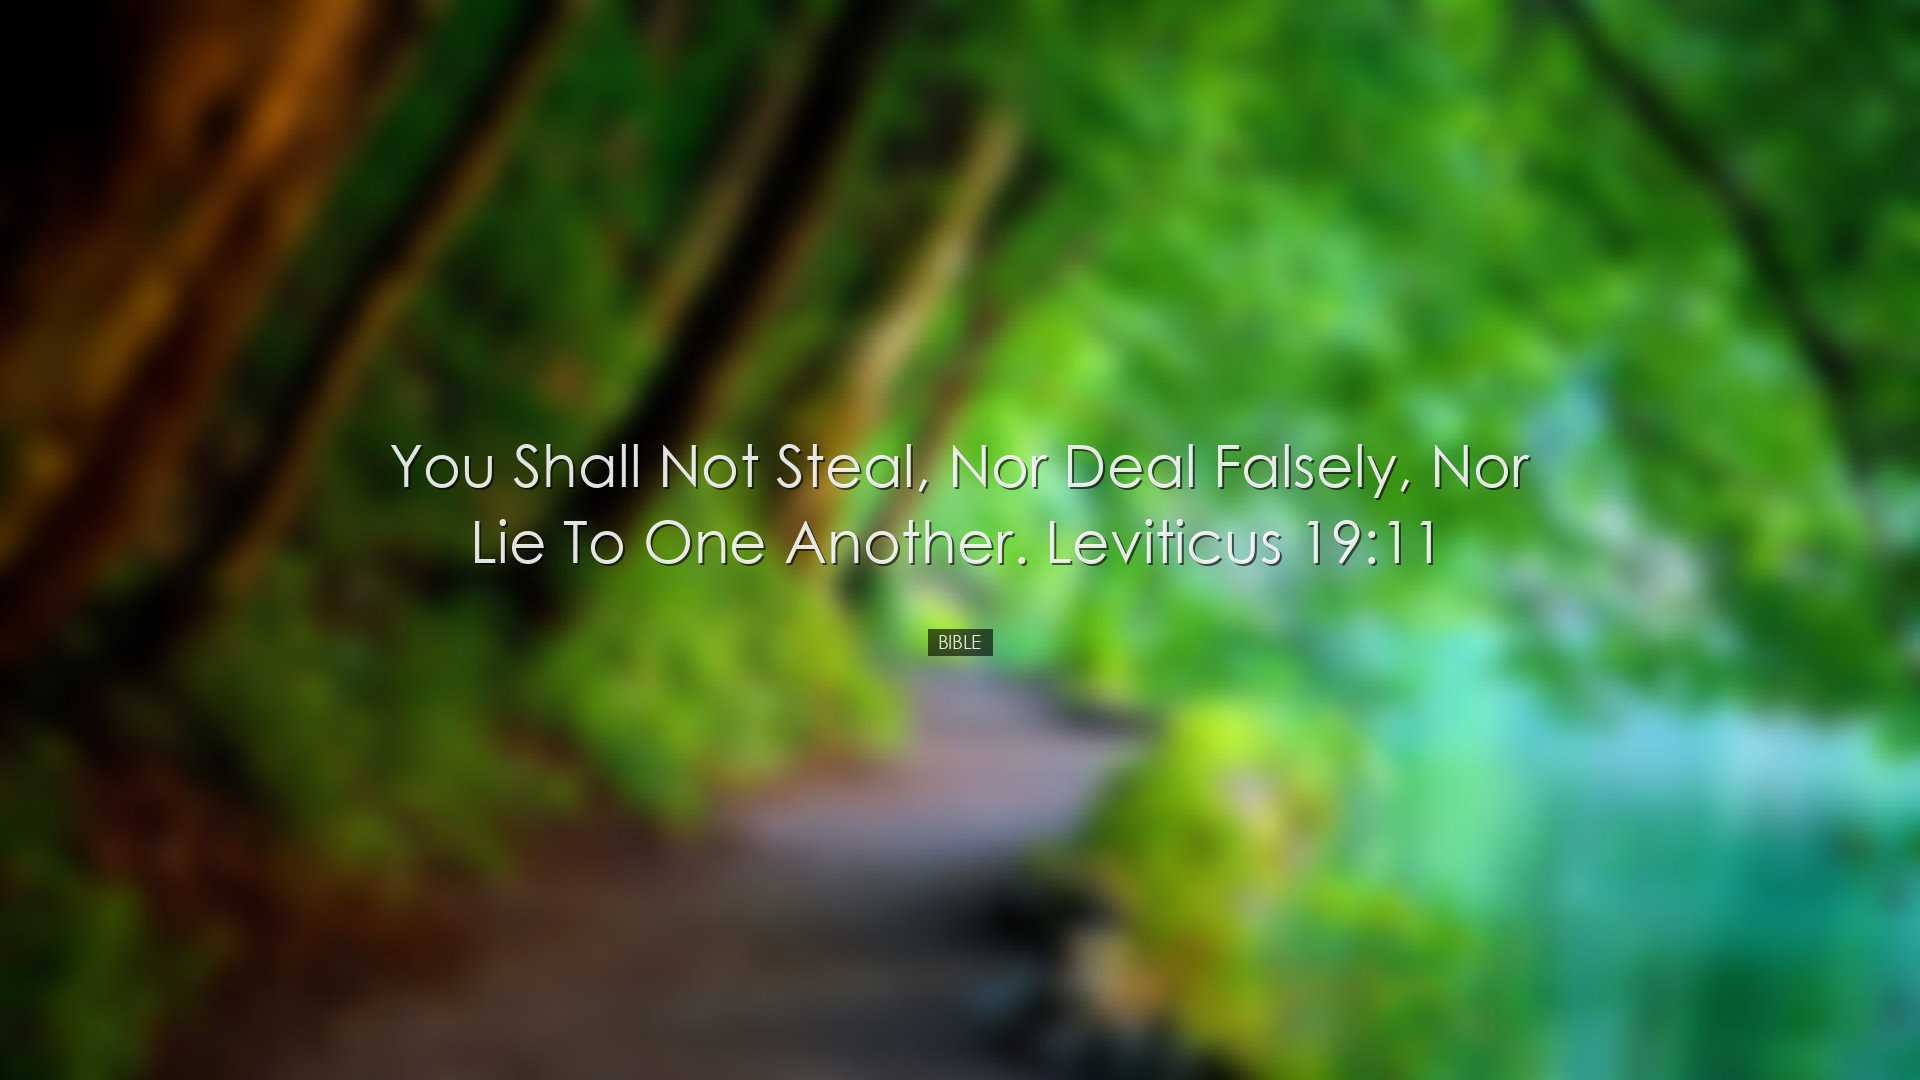 You shall not steal, nor deal falsely, nor lie to one another. Lev